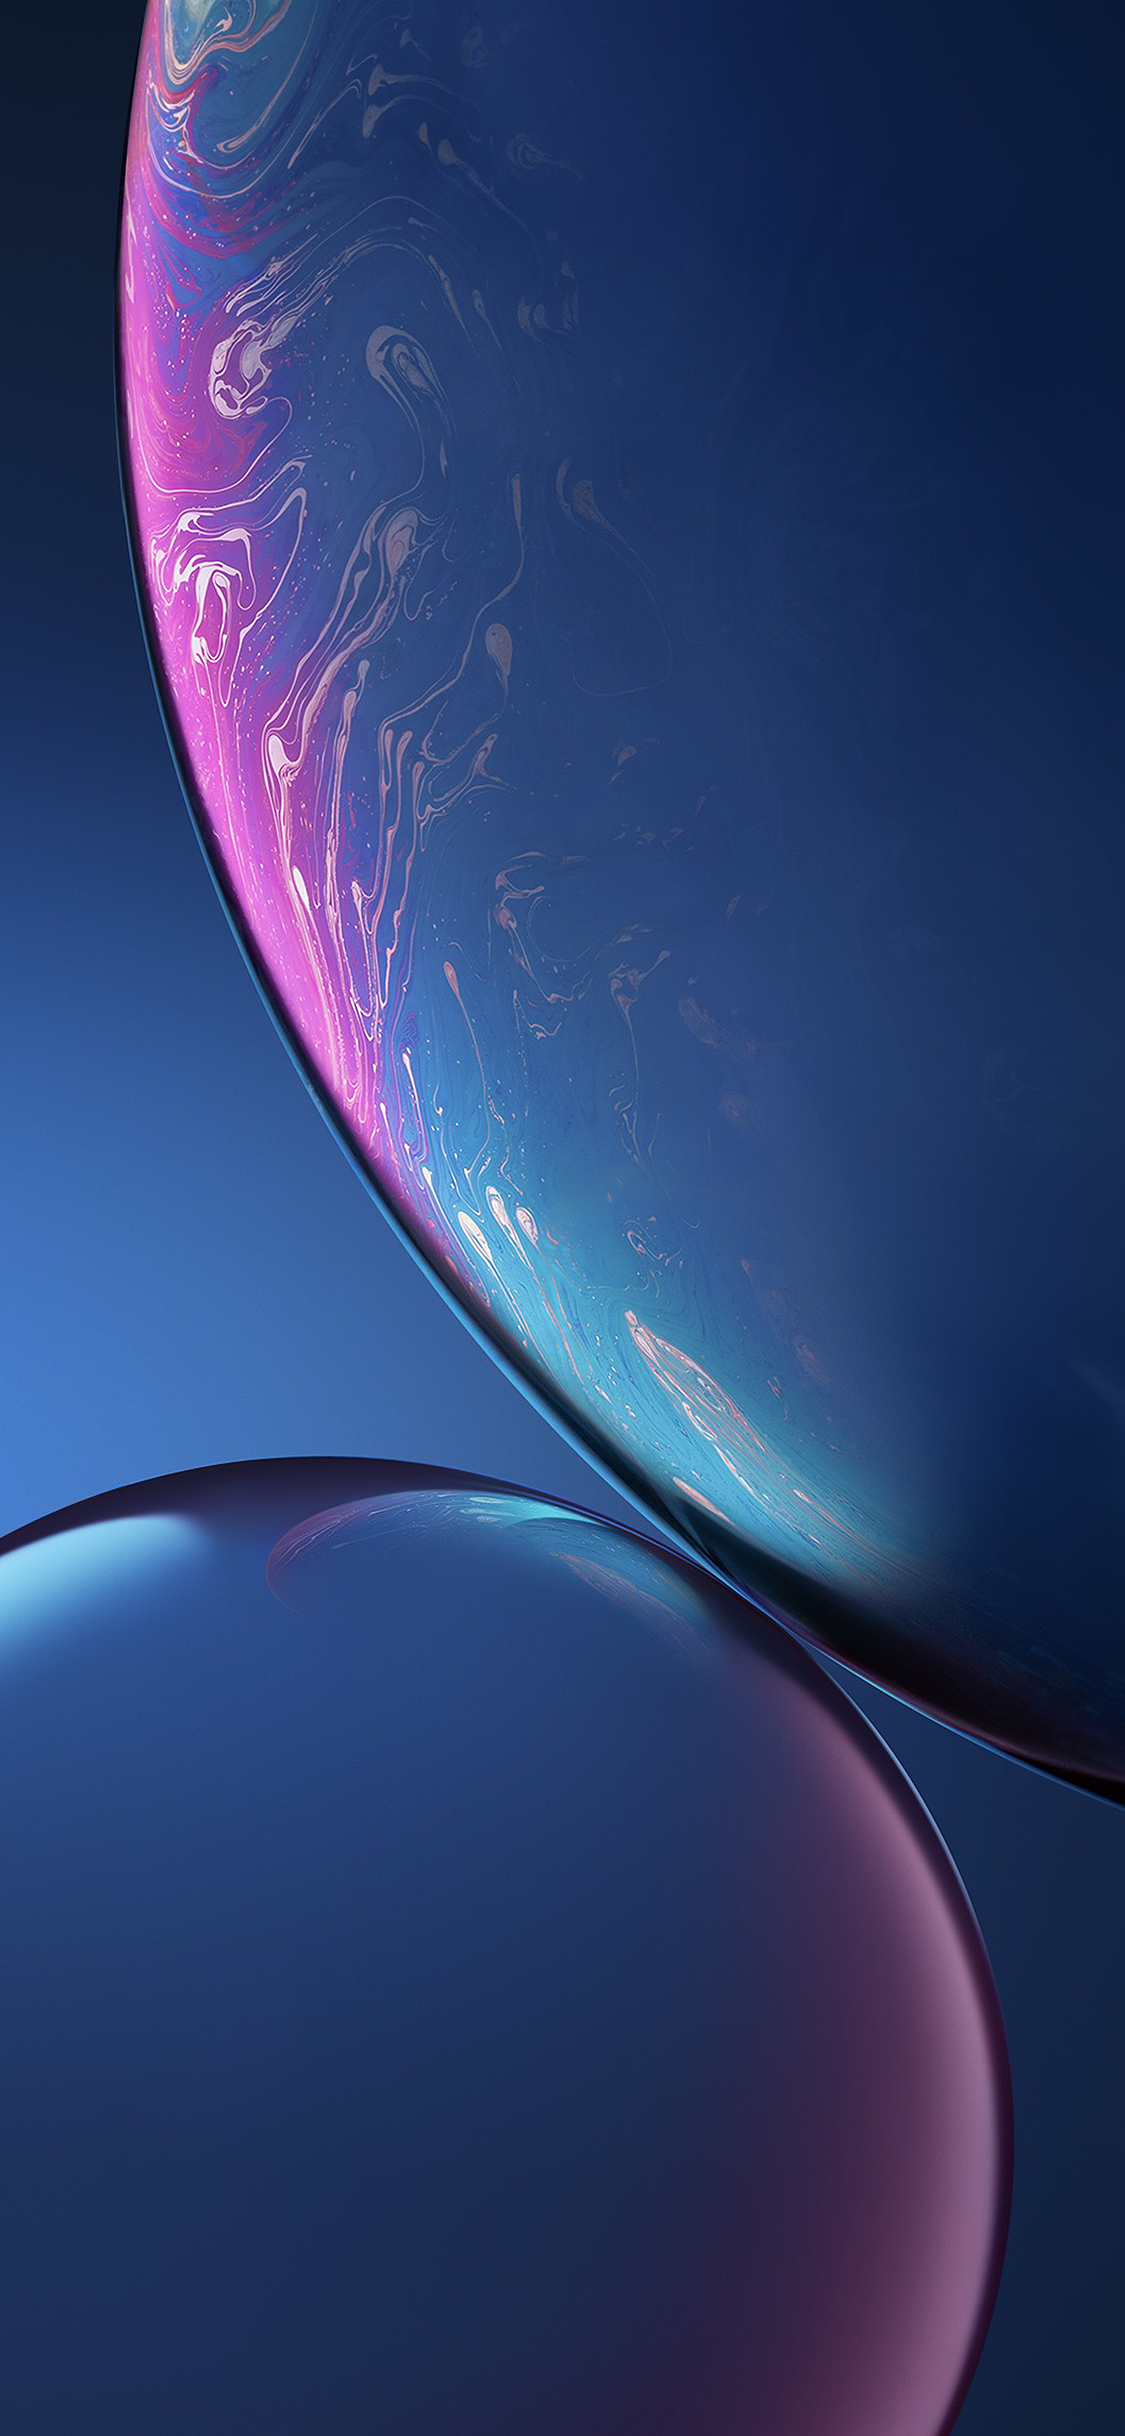 iPhone XR Stock Wallpaper - Blue - Wallpapers Central